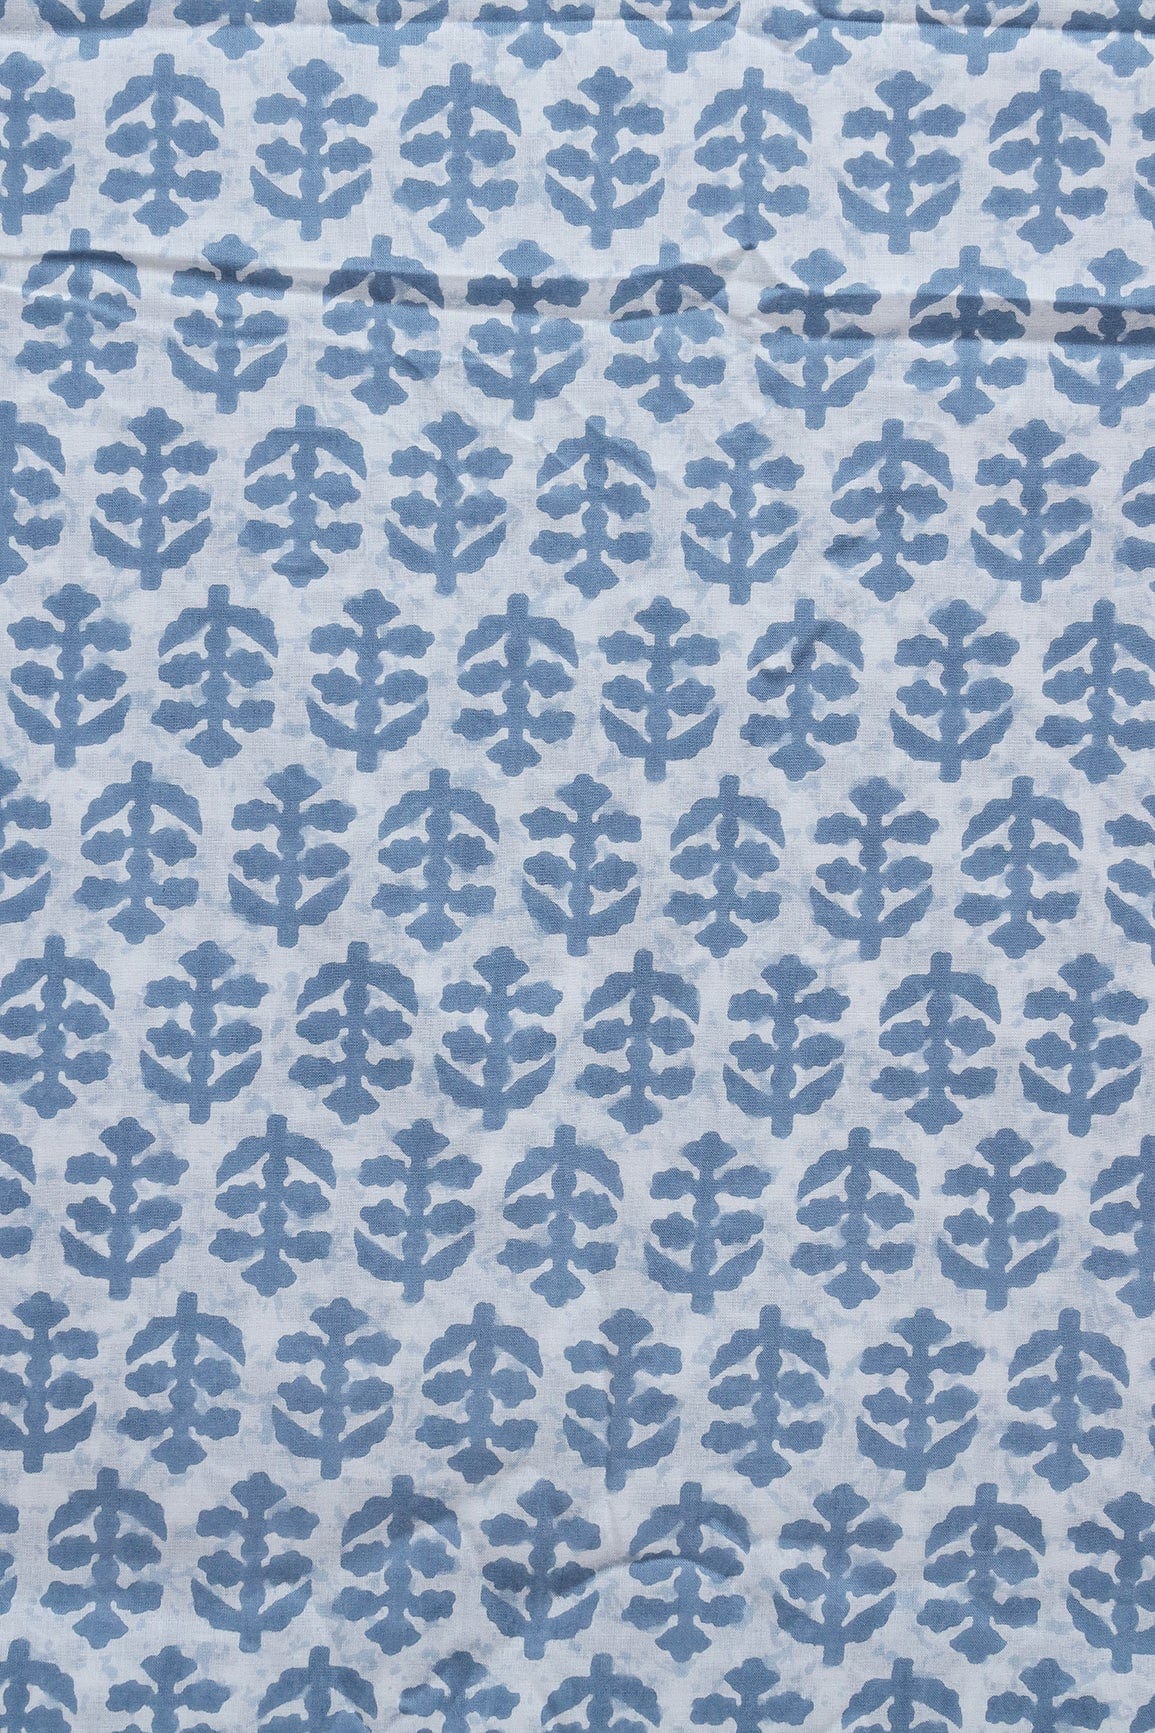 doeraa Prints Pastel Blue And White Floral Print On Pure Cotton Fabric